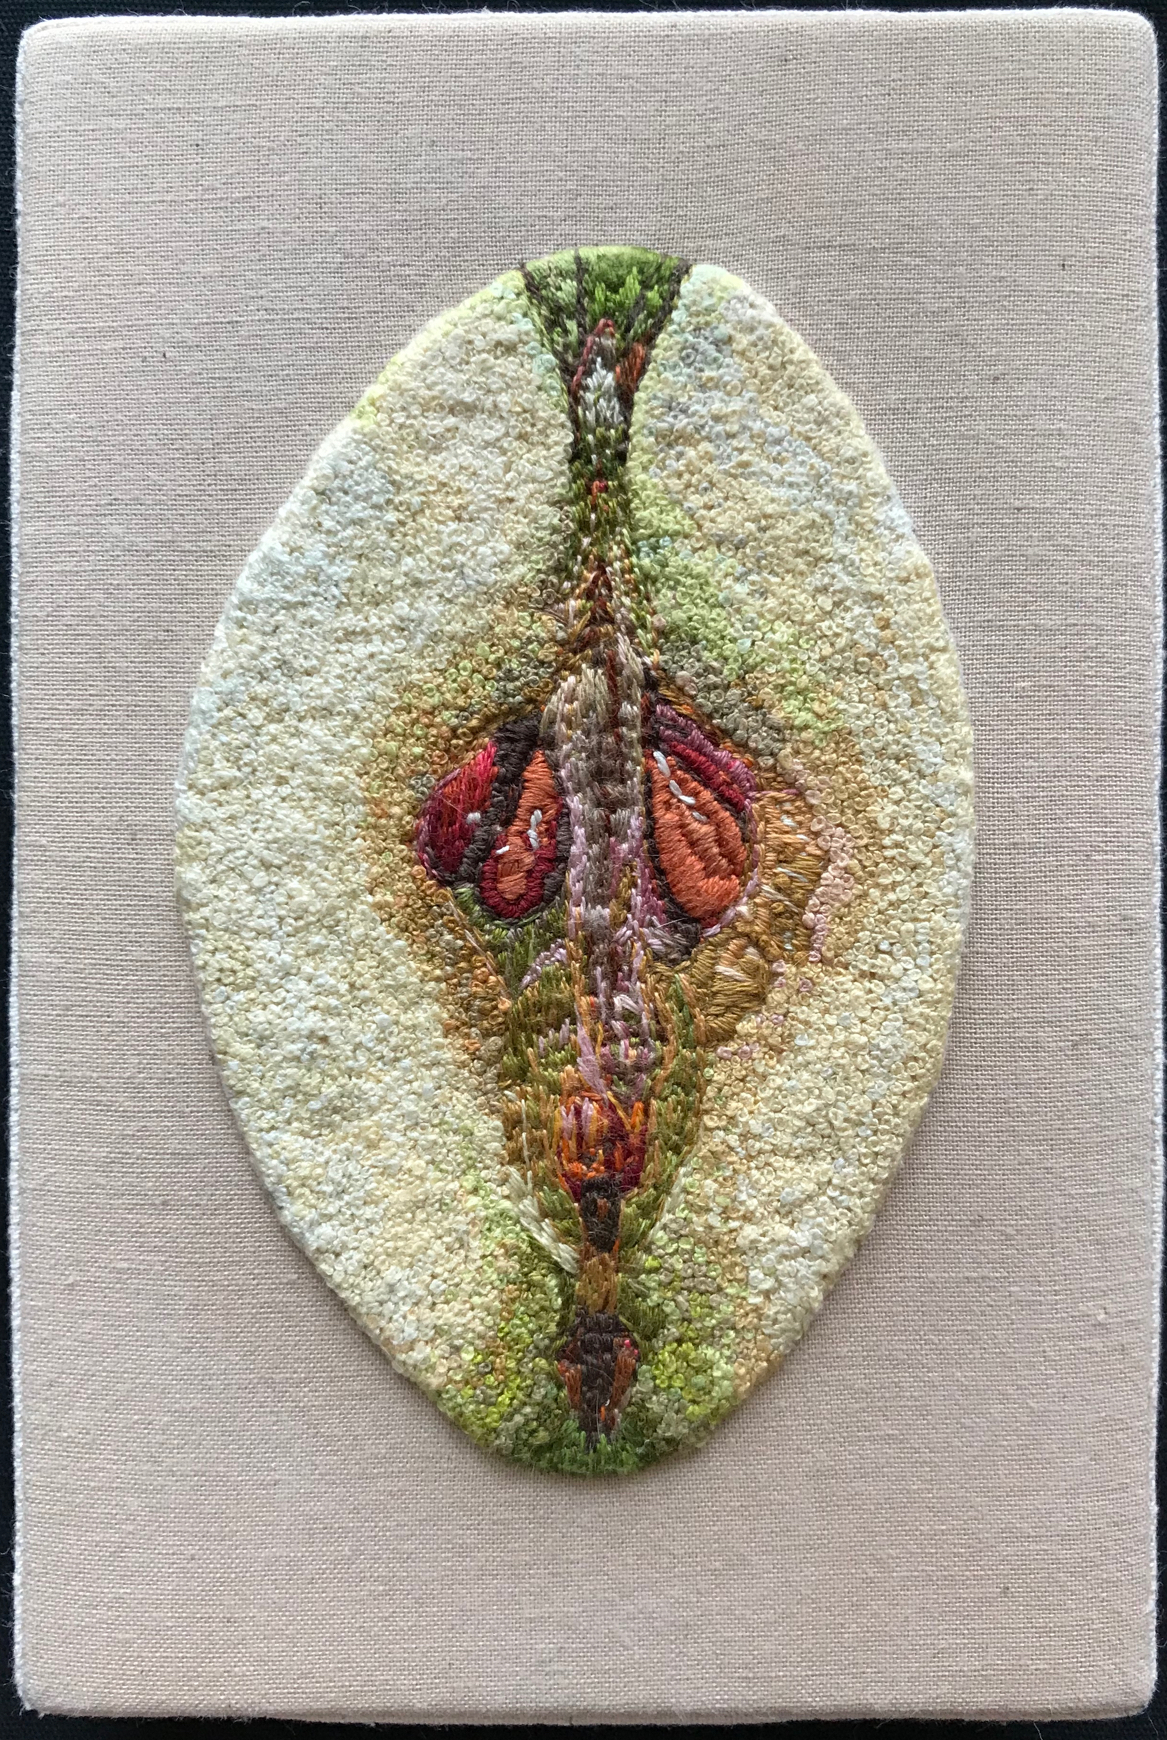  Teresa Shields  One Bad Apple  French Knots on Canvas  6” x 4” x 1”  2018 